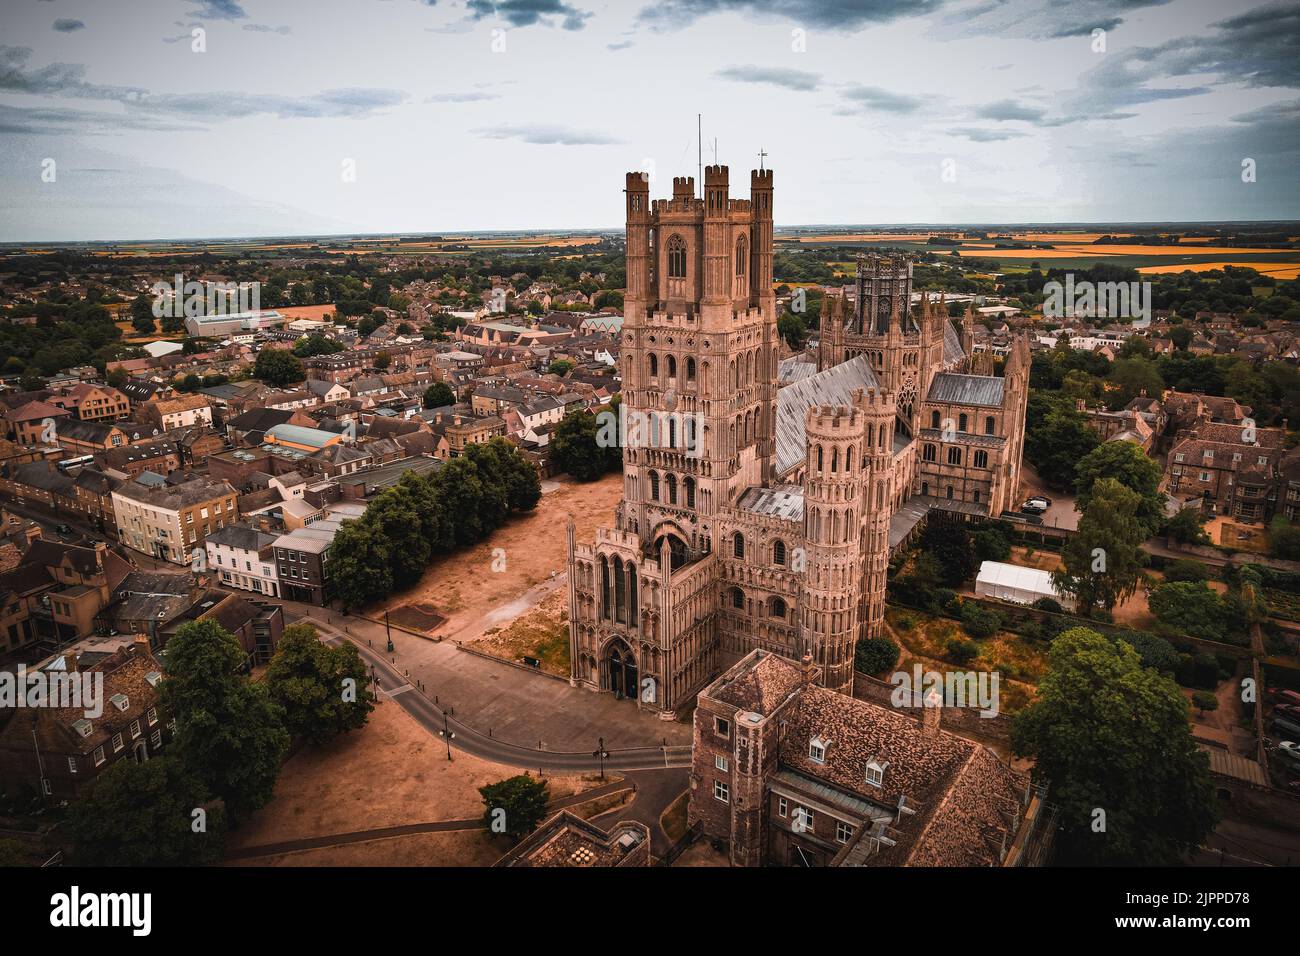 An aerial view of Ely Cathedral or Cathedral Church of the Holy and Undivided Trinity in England Stock Photo